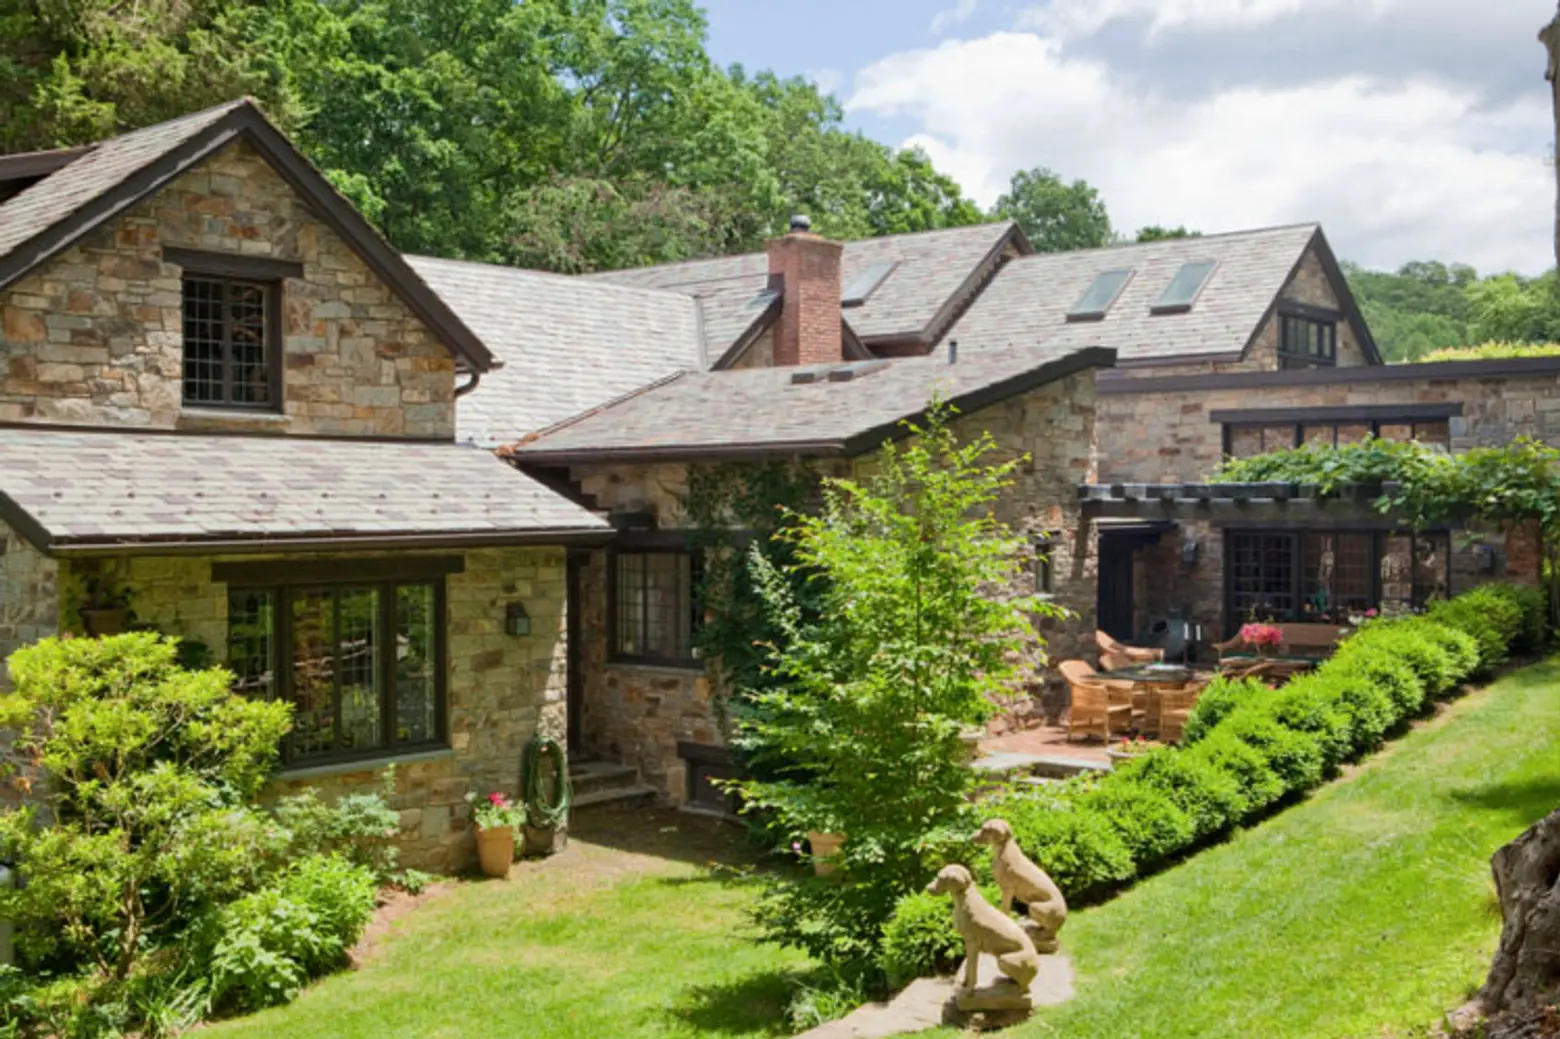 Woodwork and Greenery Abound at This Upstate Stone House by BNO Design